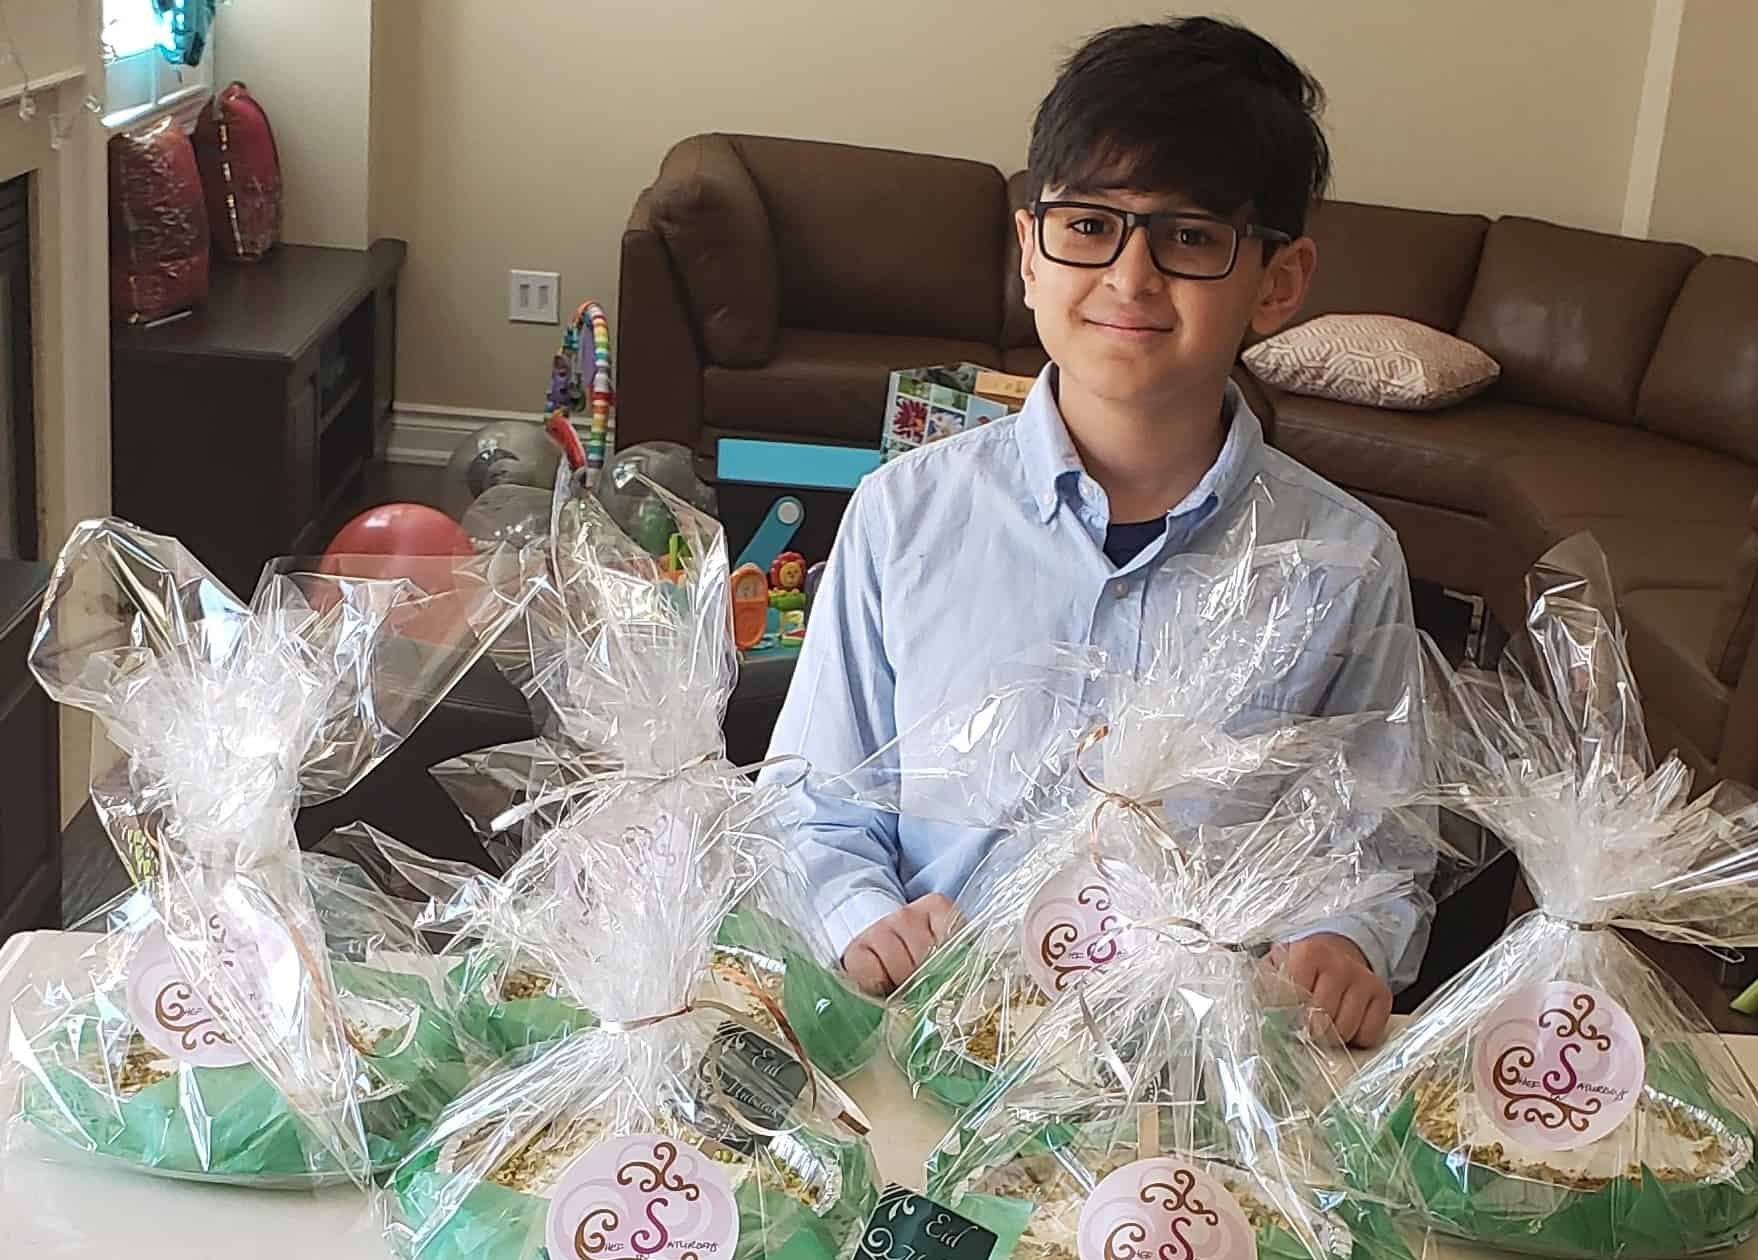 Mississauga boy cooks up a storm to help people during Ramadan, and year-round